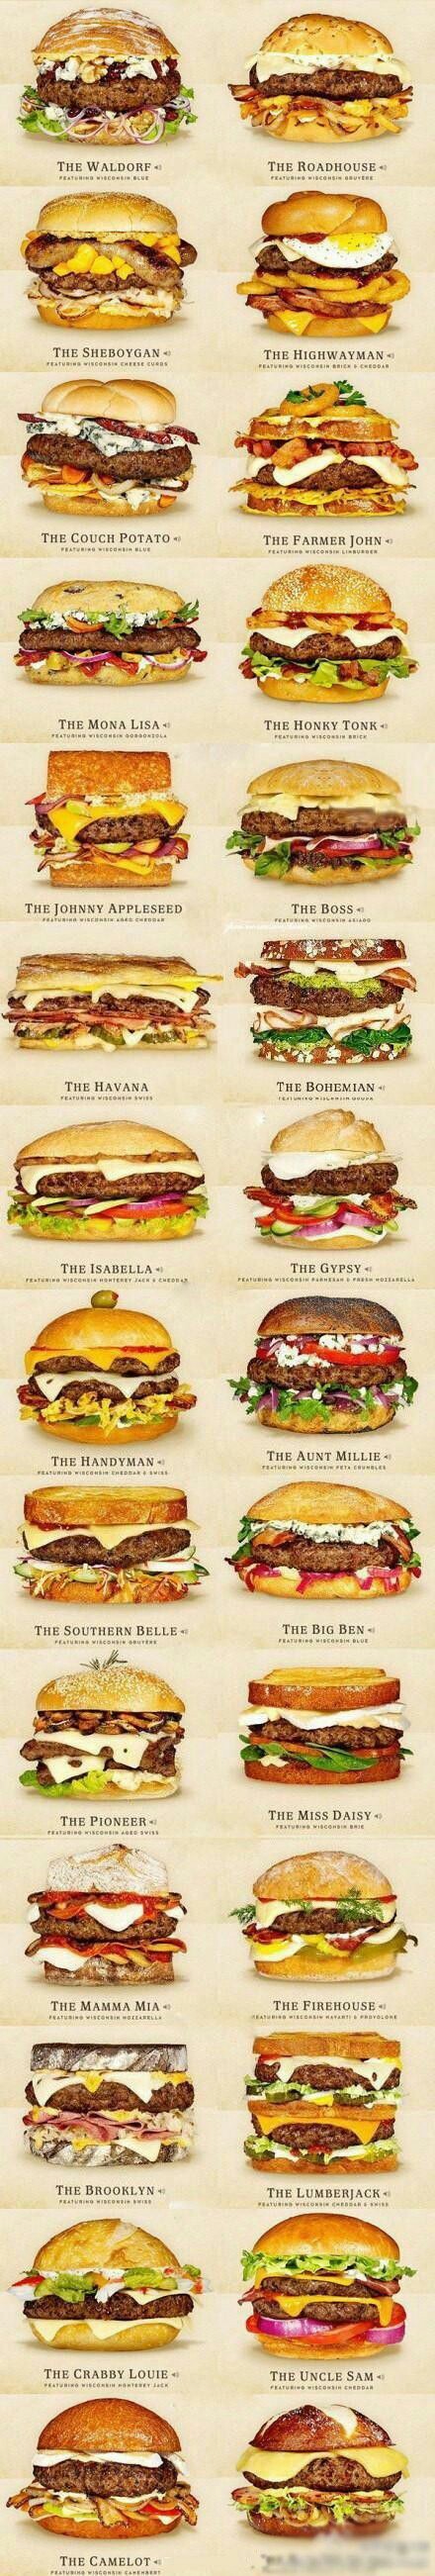 cheeseburger ideas - The Waldorf The Roadhouse The Sheboygan The Highwayman Colin Bricheddar The Couch Potato The Farmer John The Mona Lisa The Honky Tonk The Johnny Appleseed The Boss The Havana The Bohemian The Isabella The Gypsy Wiceronterey Yaende The